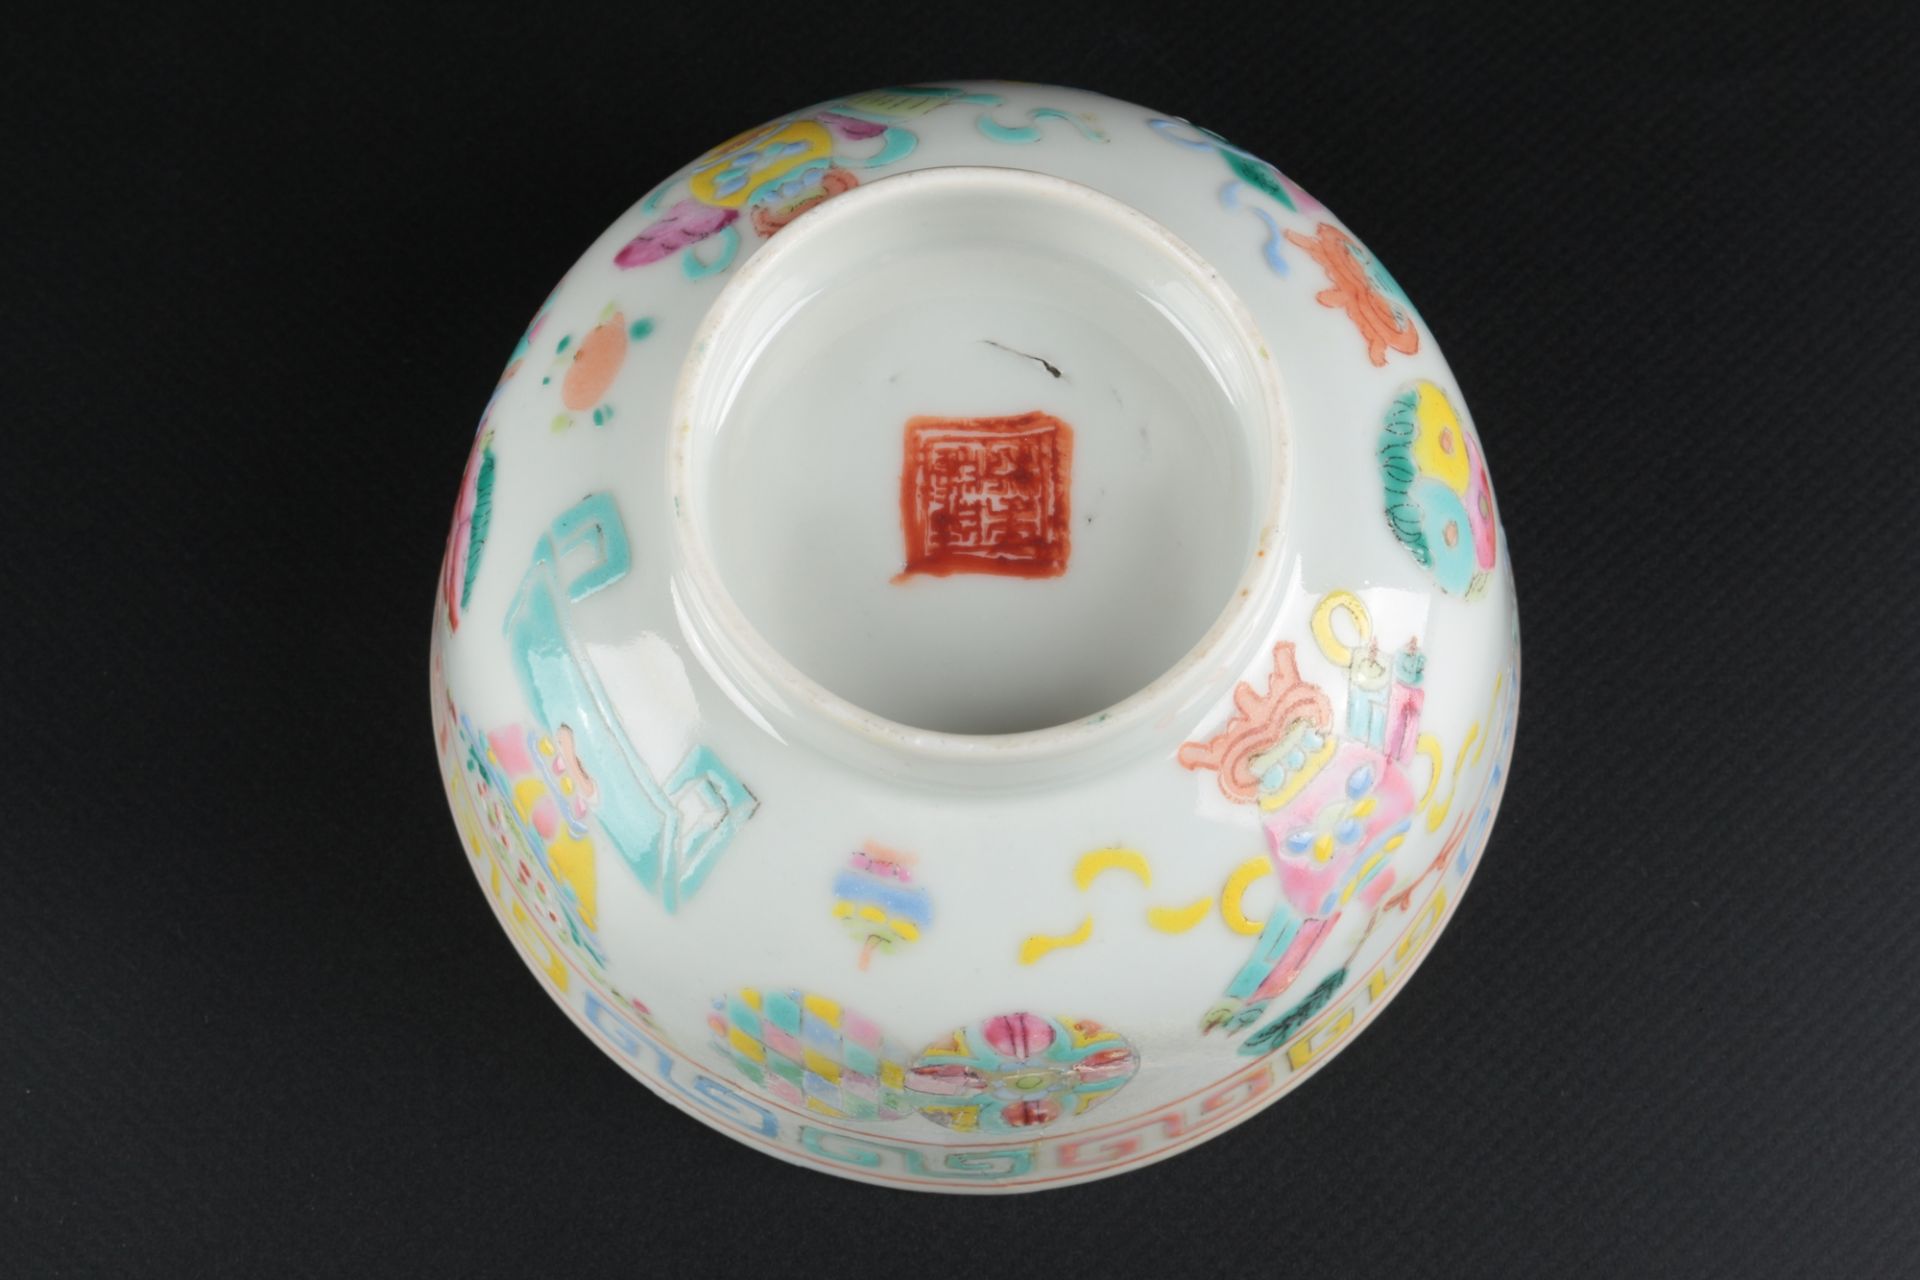 China Reisschale mit Kois Qing-Dynastie, chinese ceramic bowl, - Image 4 of 4